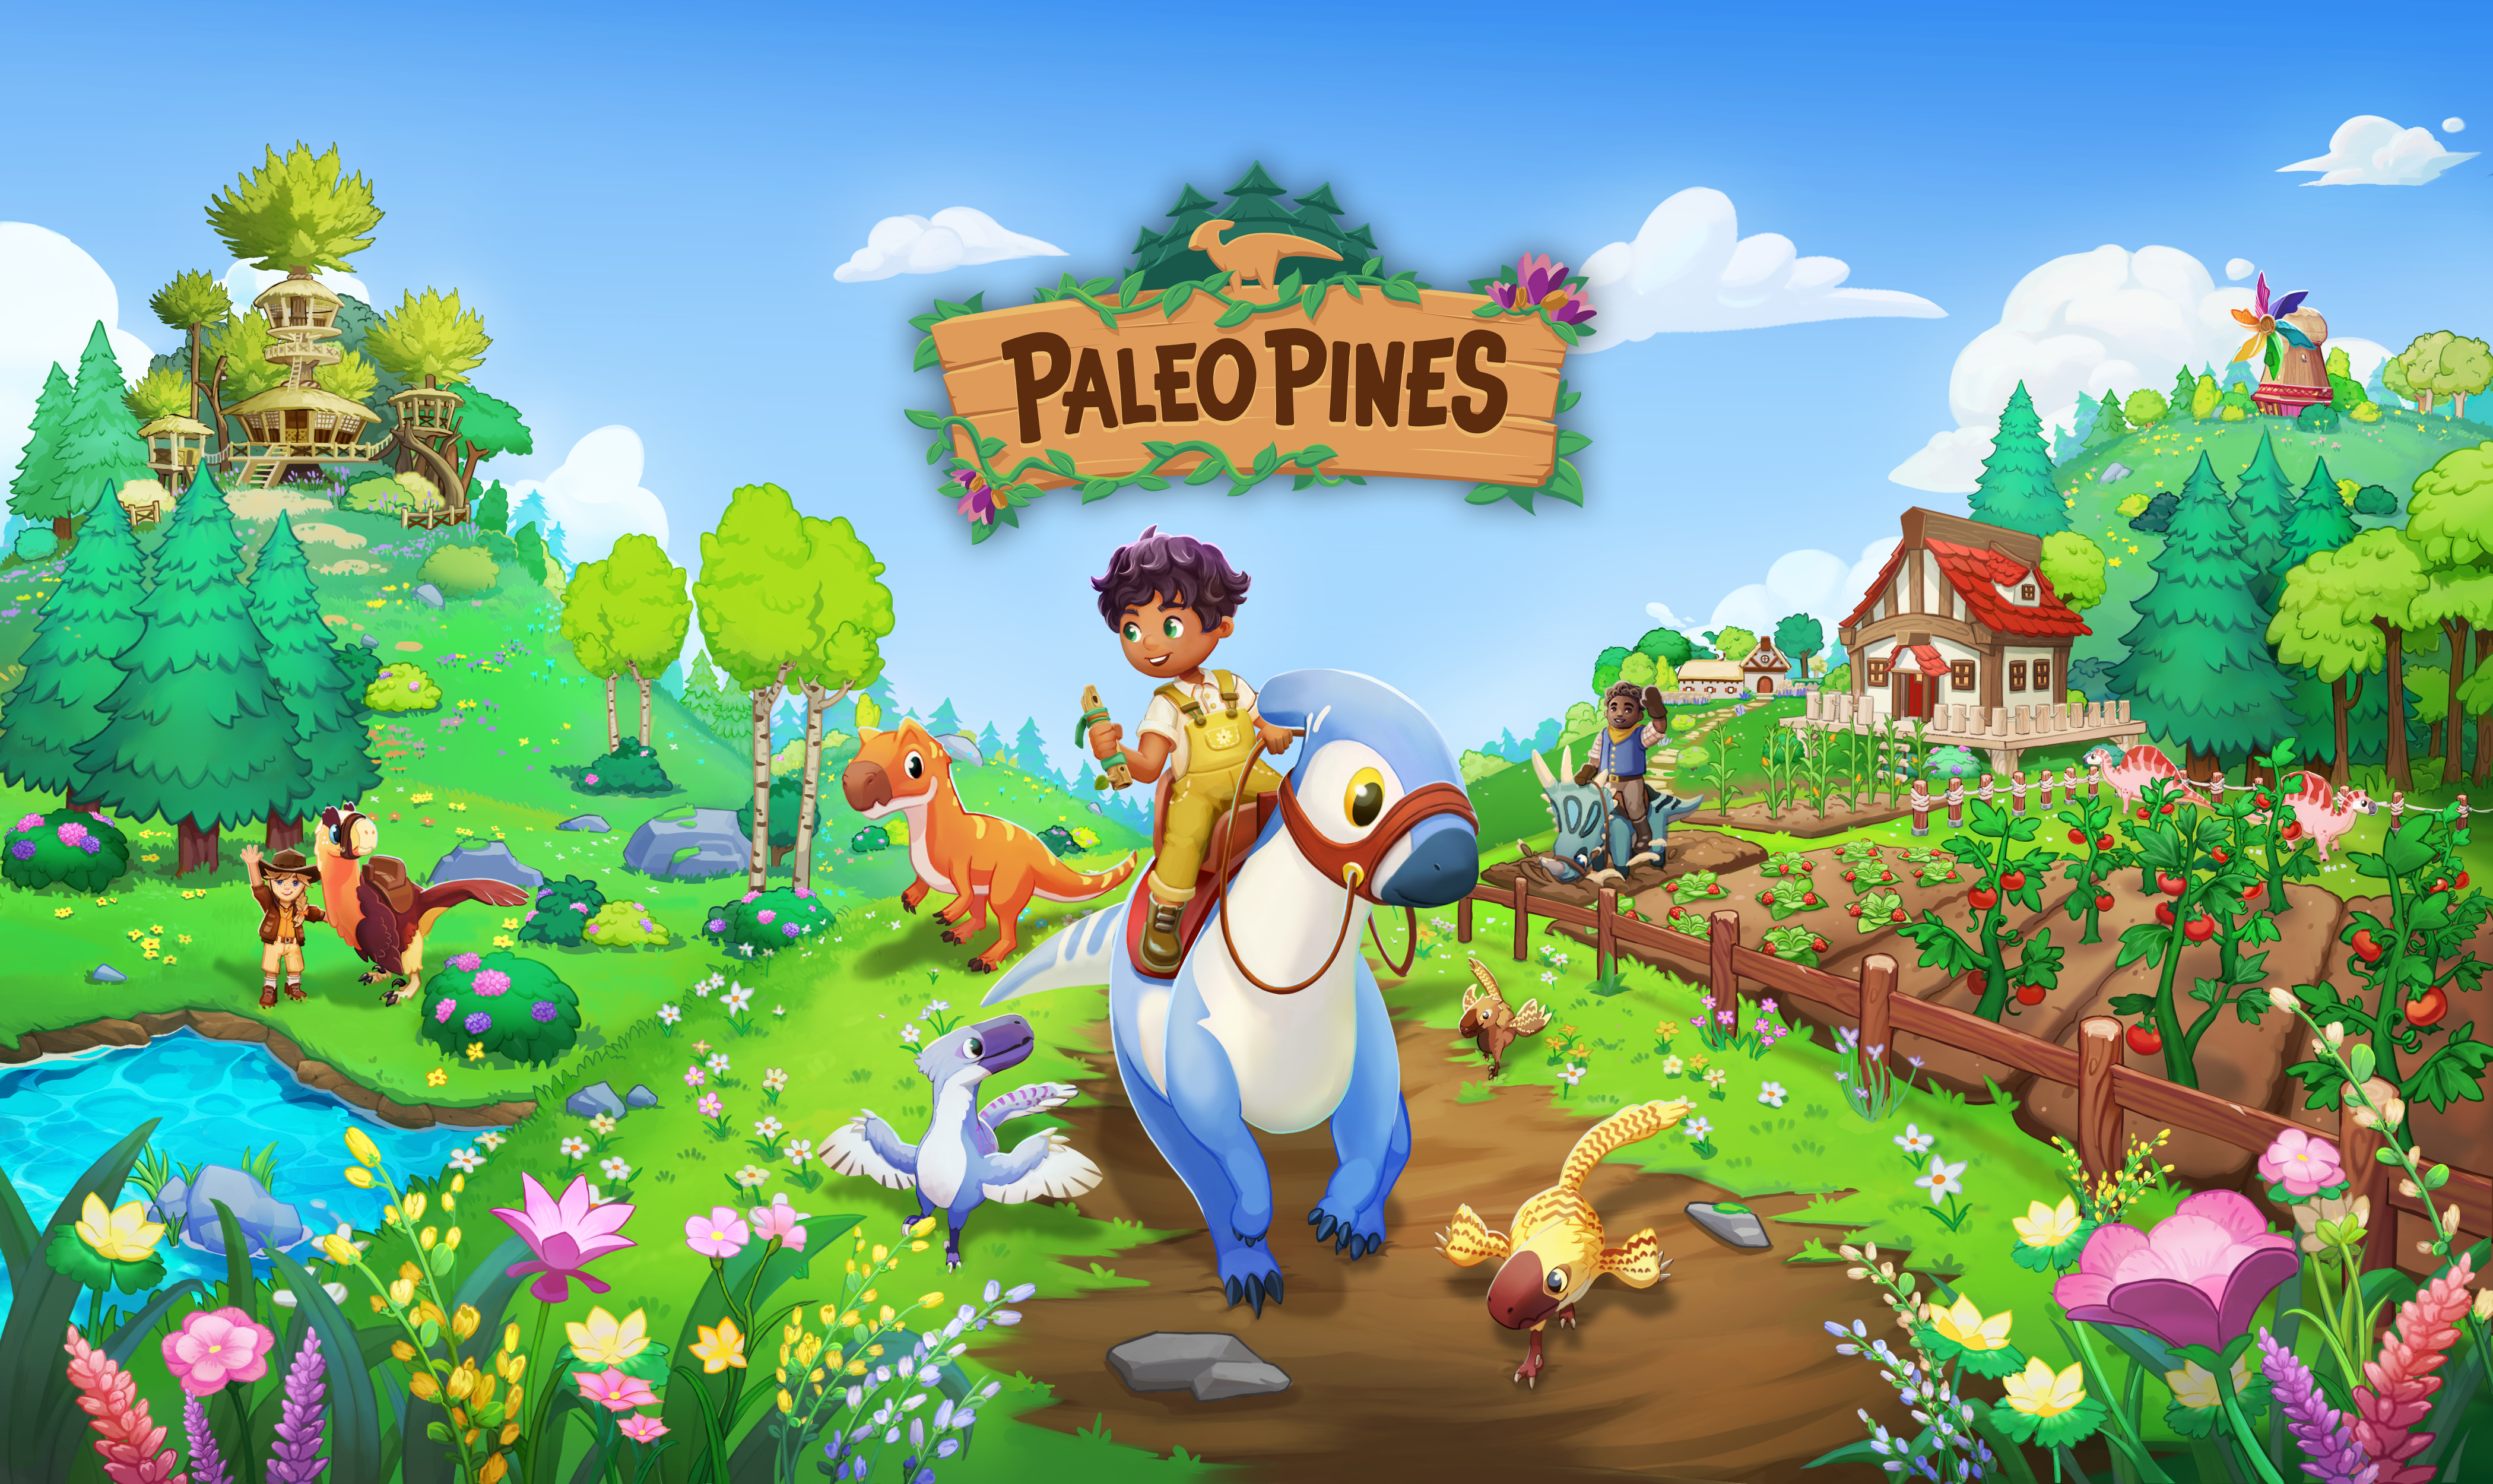 Become a dino rancher in Paelo Pines, out now